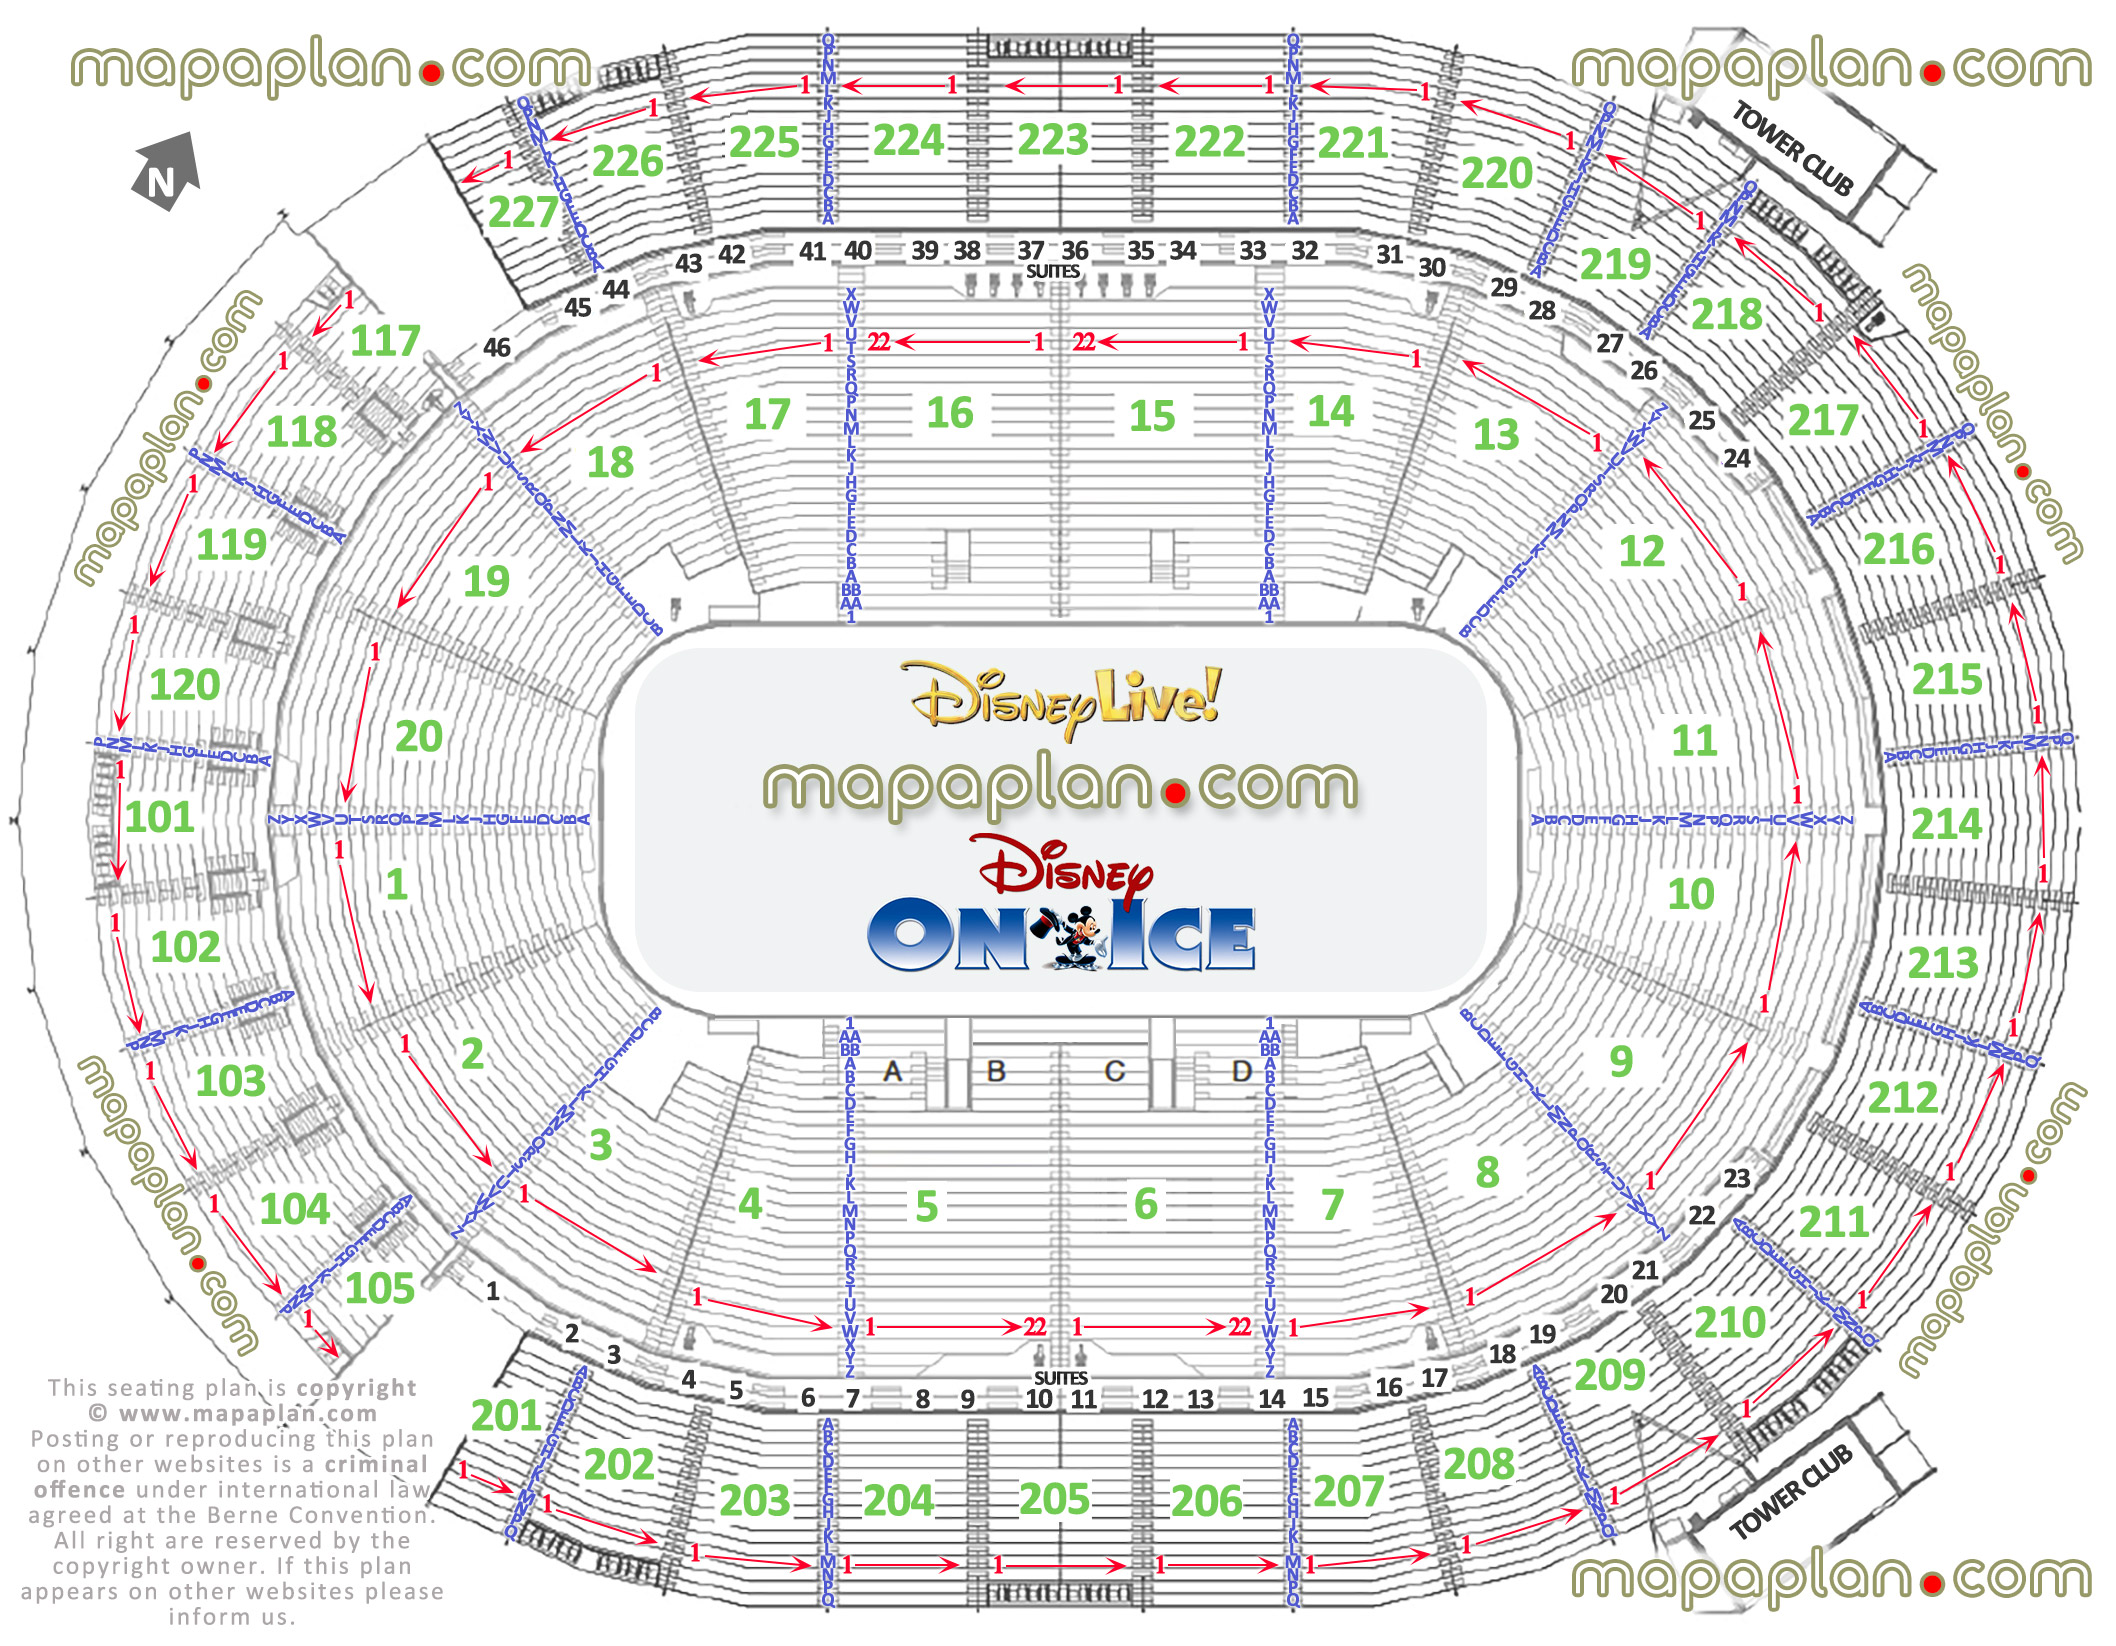 disney ice live las vegas nv usa best seat finder 3d interactive tool precise detailed aisle seat numbering location data plan ice rink event floor level lower bowl concourse upper balcony seating suites loge boxes Las Vegas New T-Mobile Arena MGM-AEG seating chart